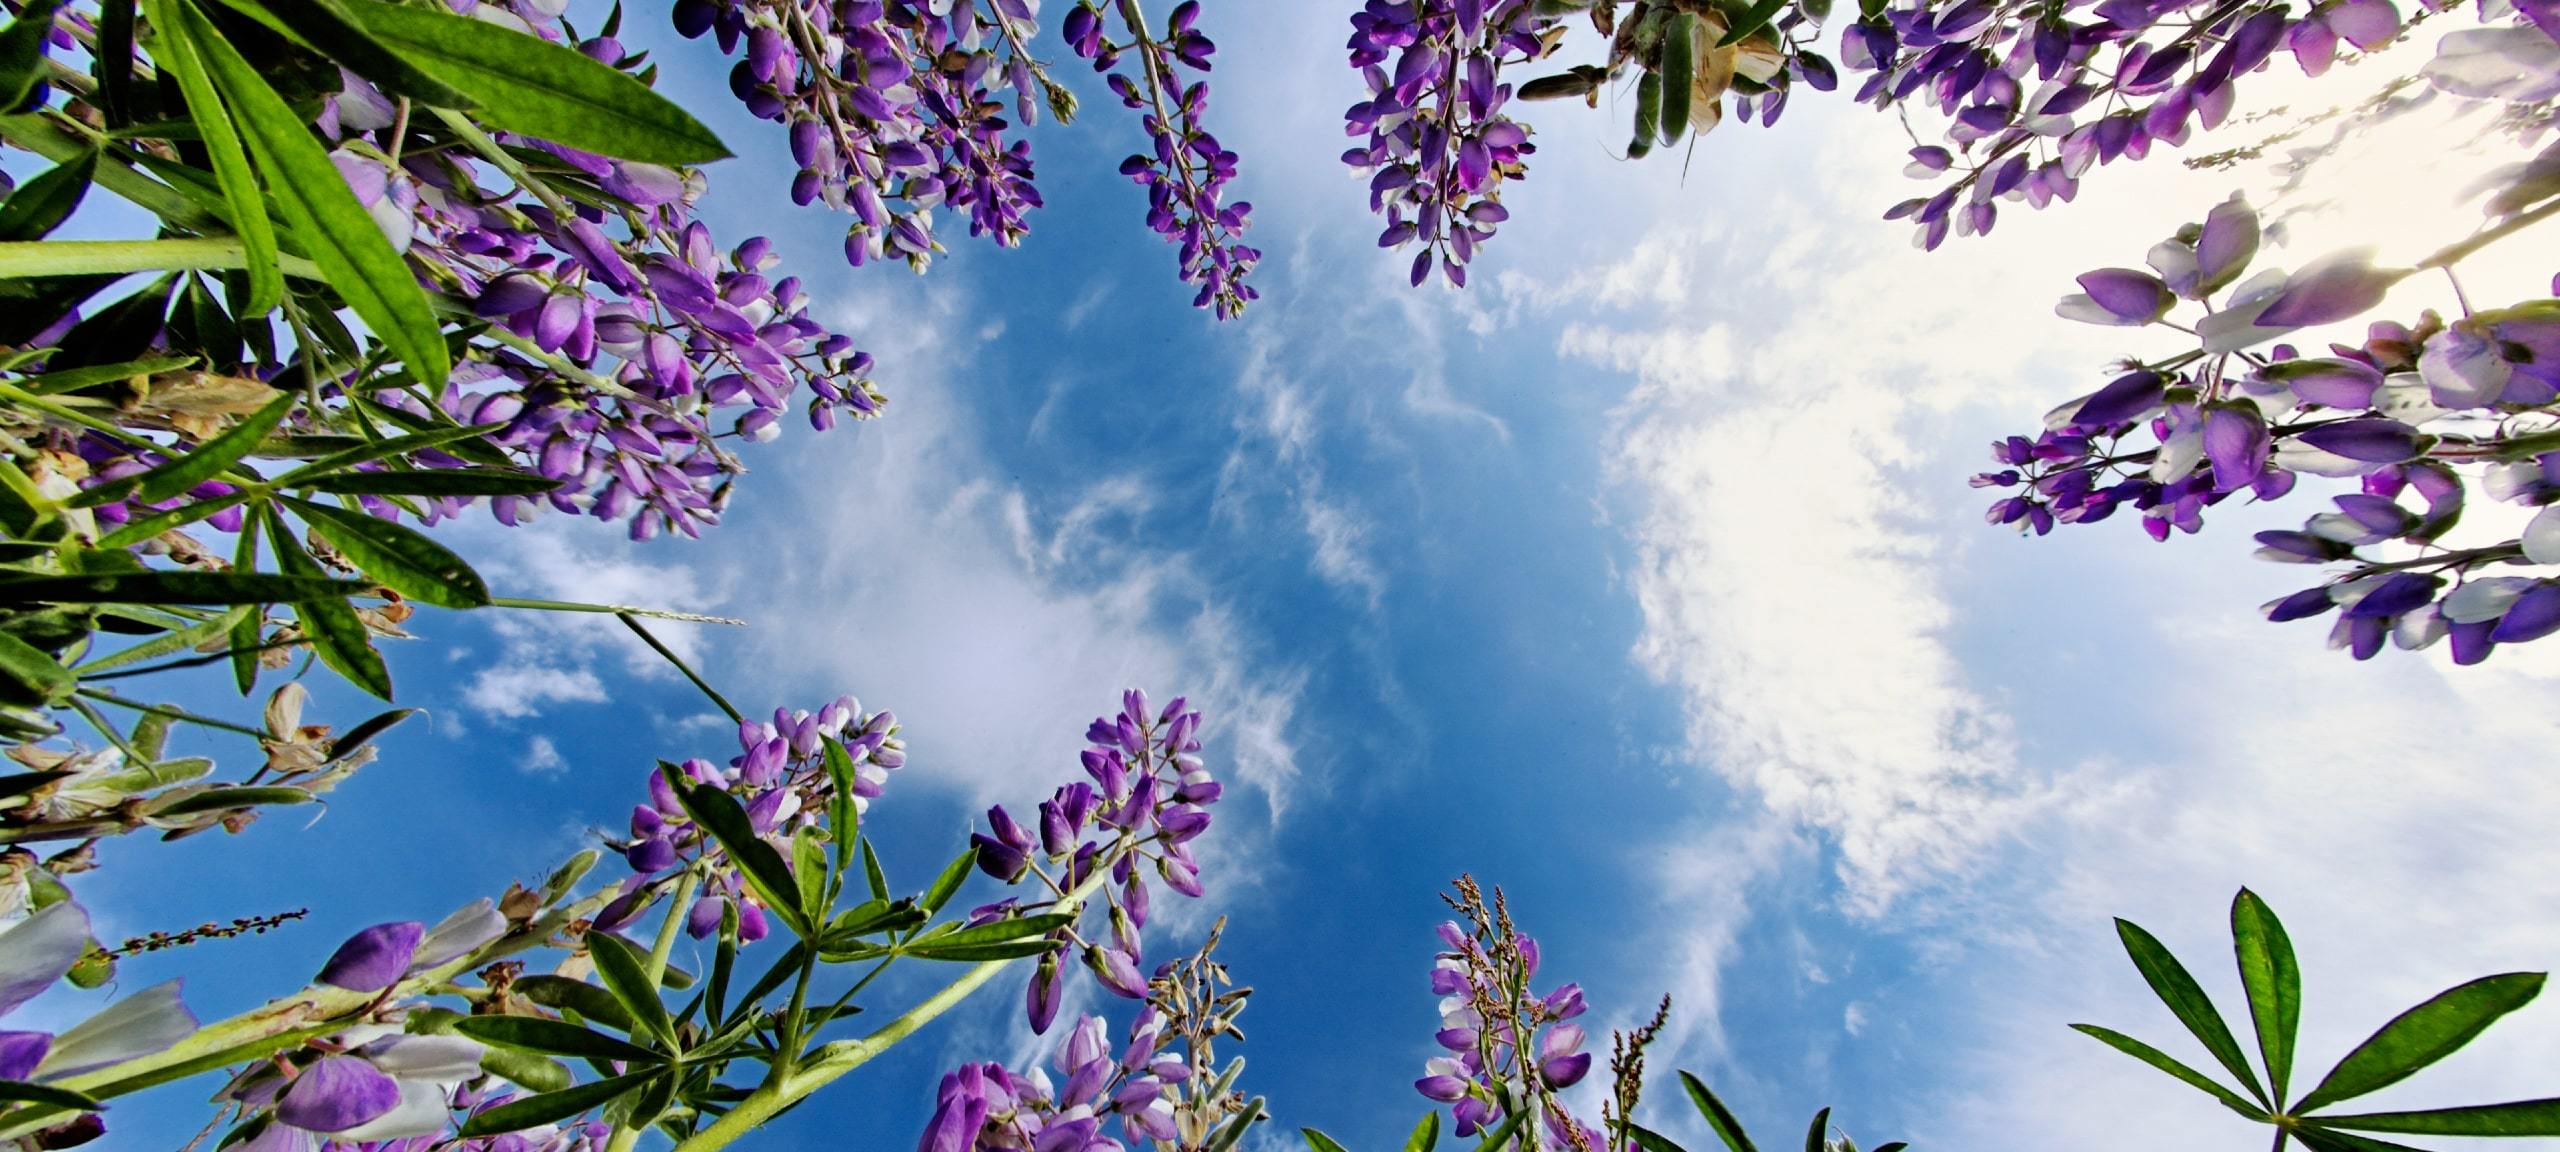 Upwards view of Lupine flowers and blue sky, typical of Santa Cruz